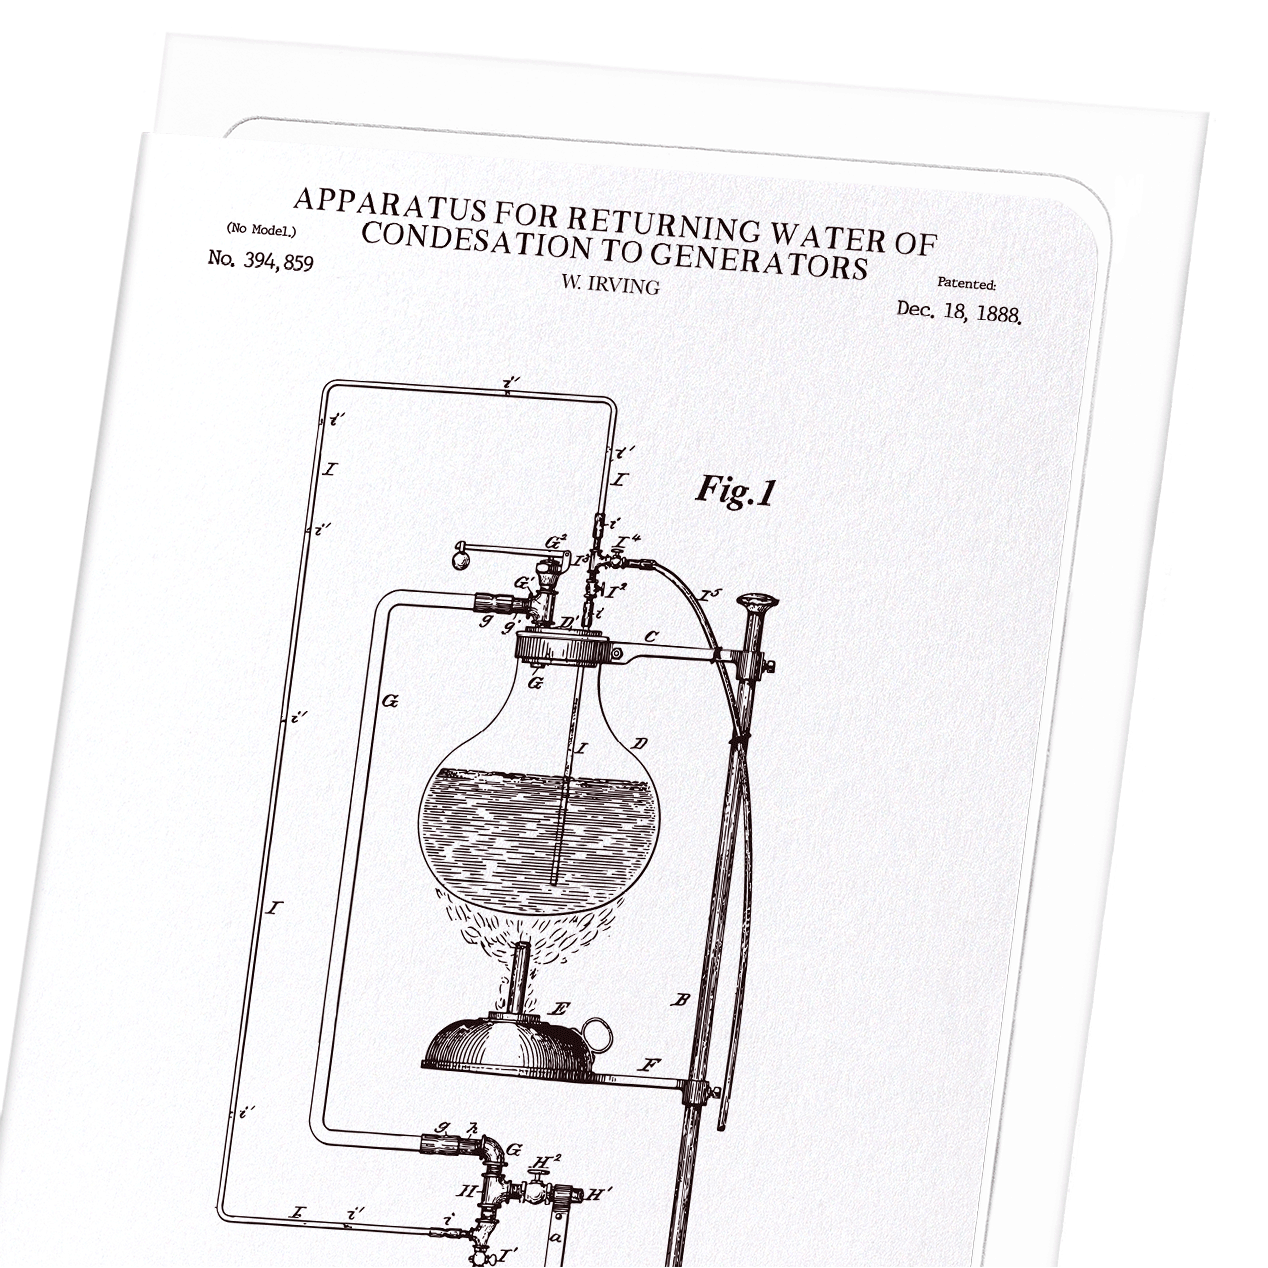 PATENT OF APPARATUS FOR RETURNING WATER OF CONDENSATION TO GENERATORS (1888)